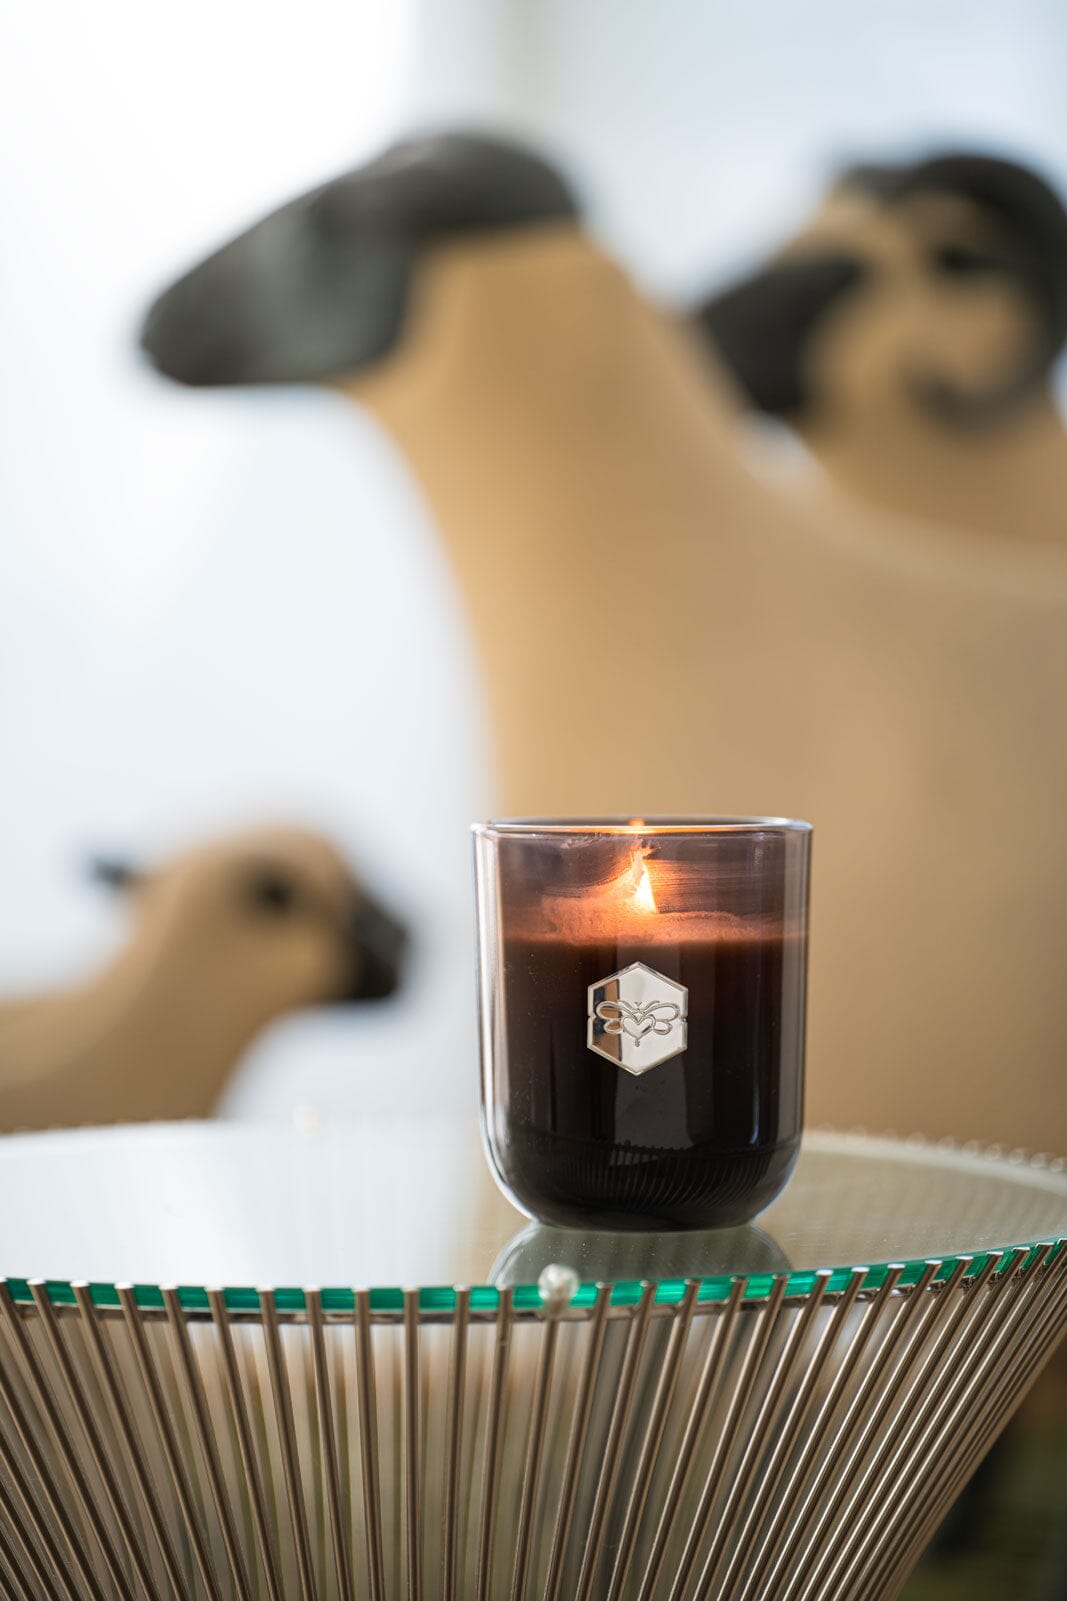 Nectar+Honey Luxe Candle with sheep